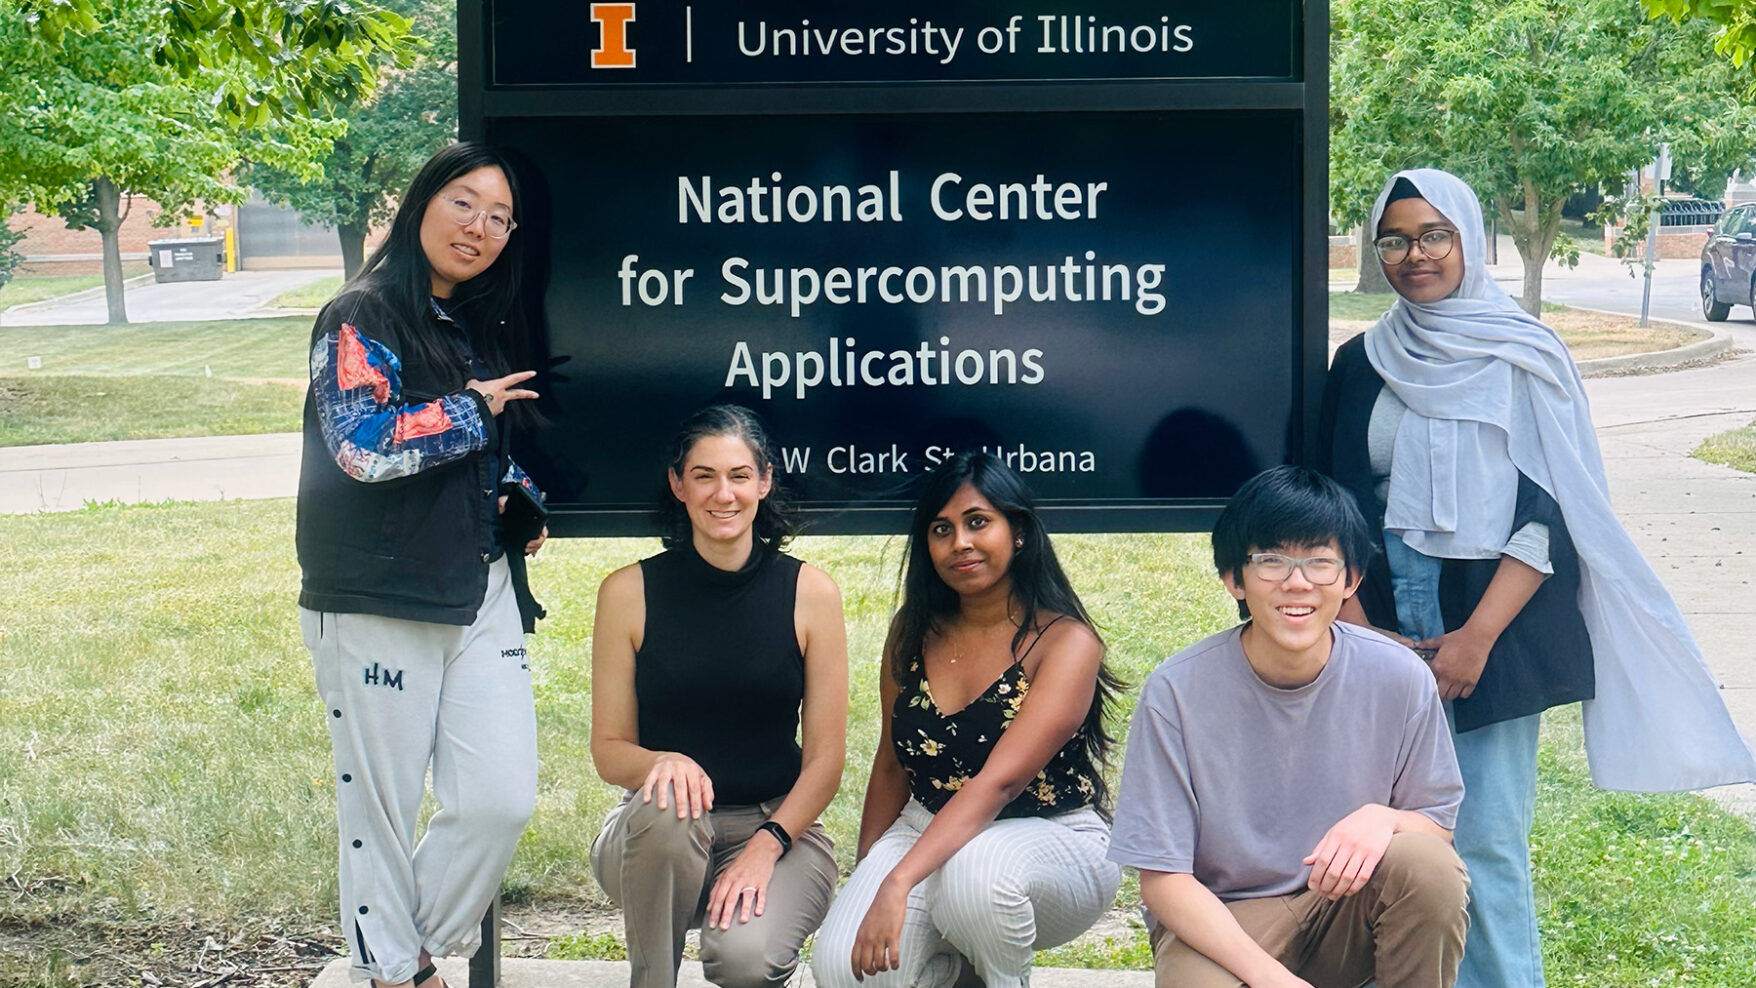 STEP students pose in front of the NCSA sign during their visit